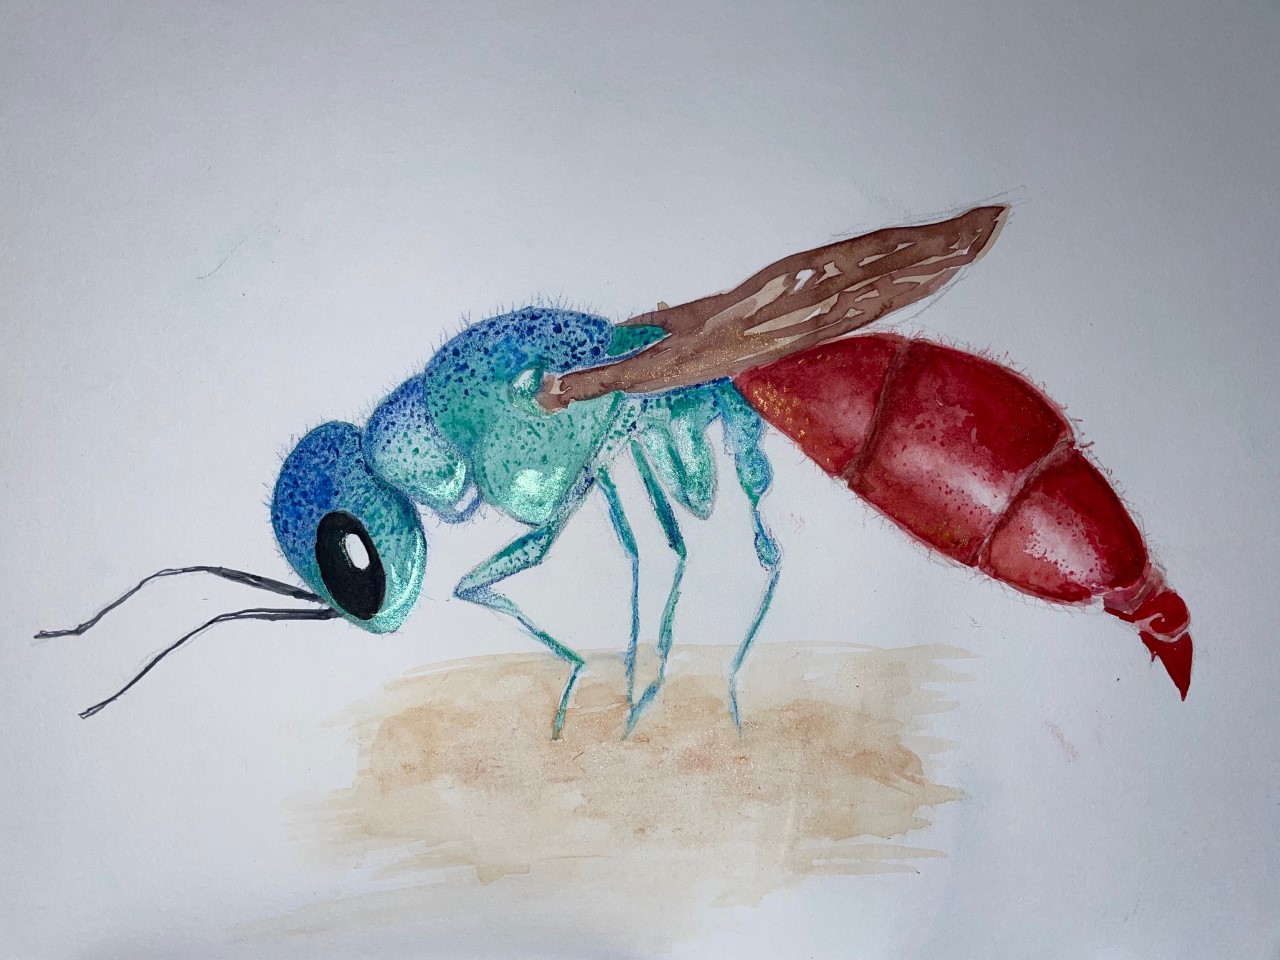 Fragment of Beauty by Alexandria Coen, 1st place in 13-18 category, Insect Week 2022 art competition